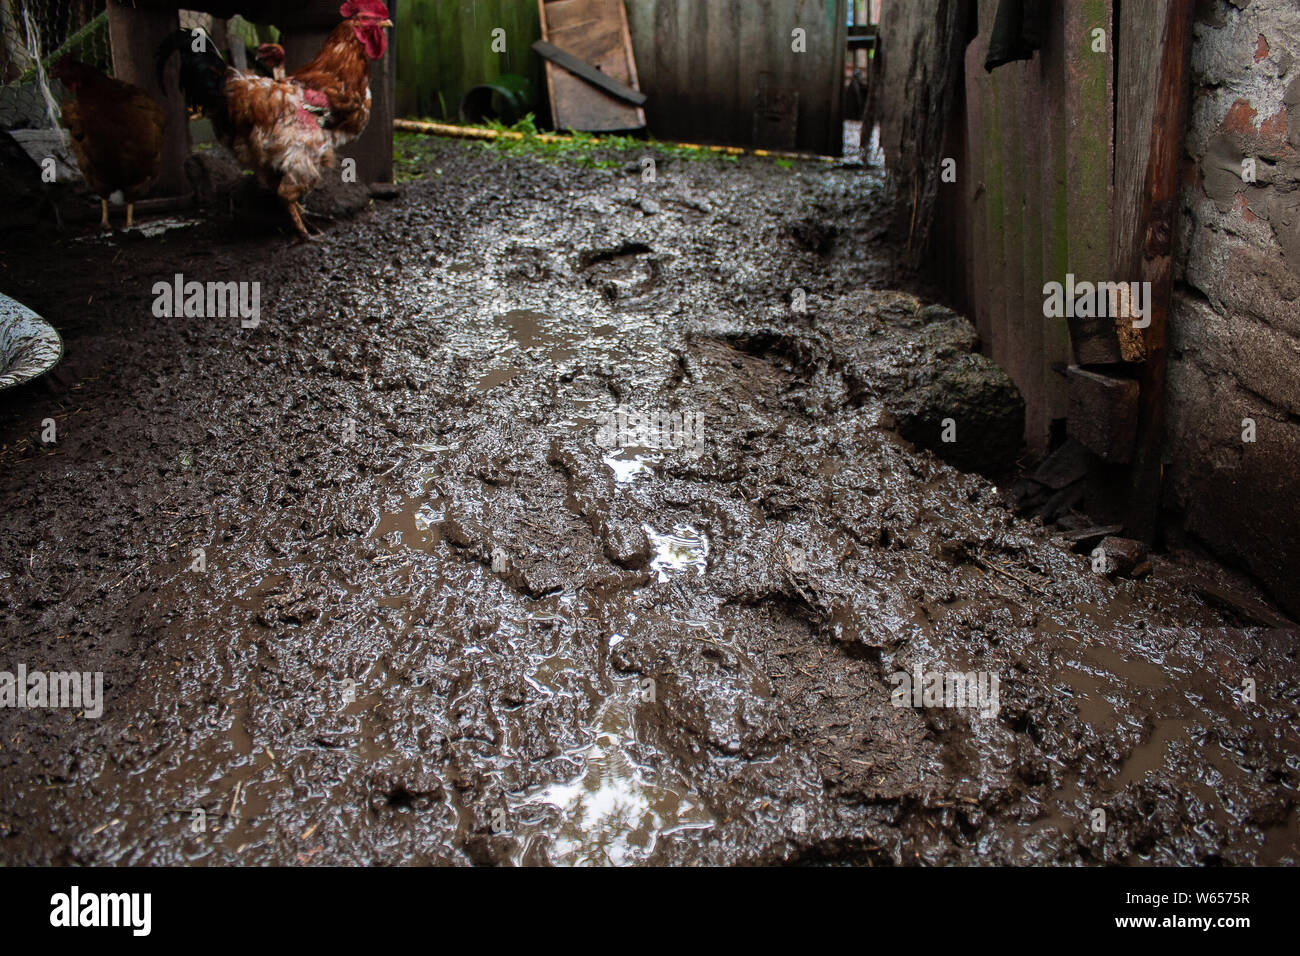 Footprints in deep mud in a rural yard and rooster Stock Photo